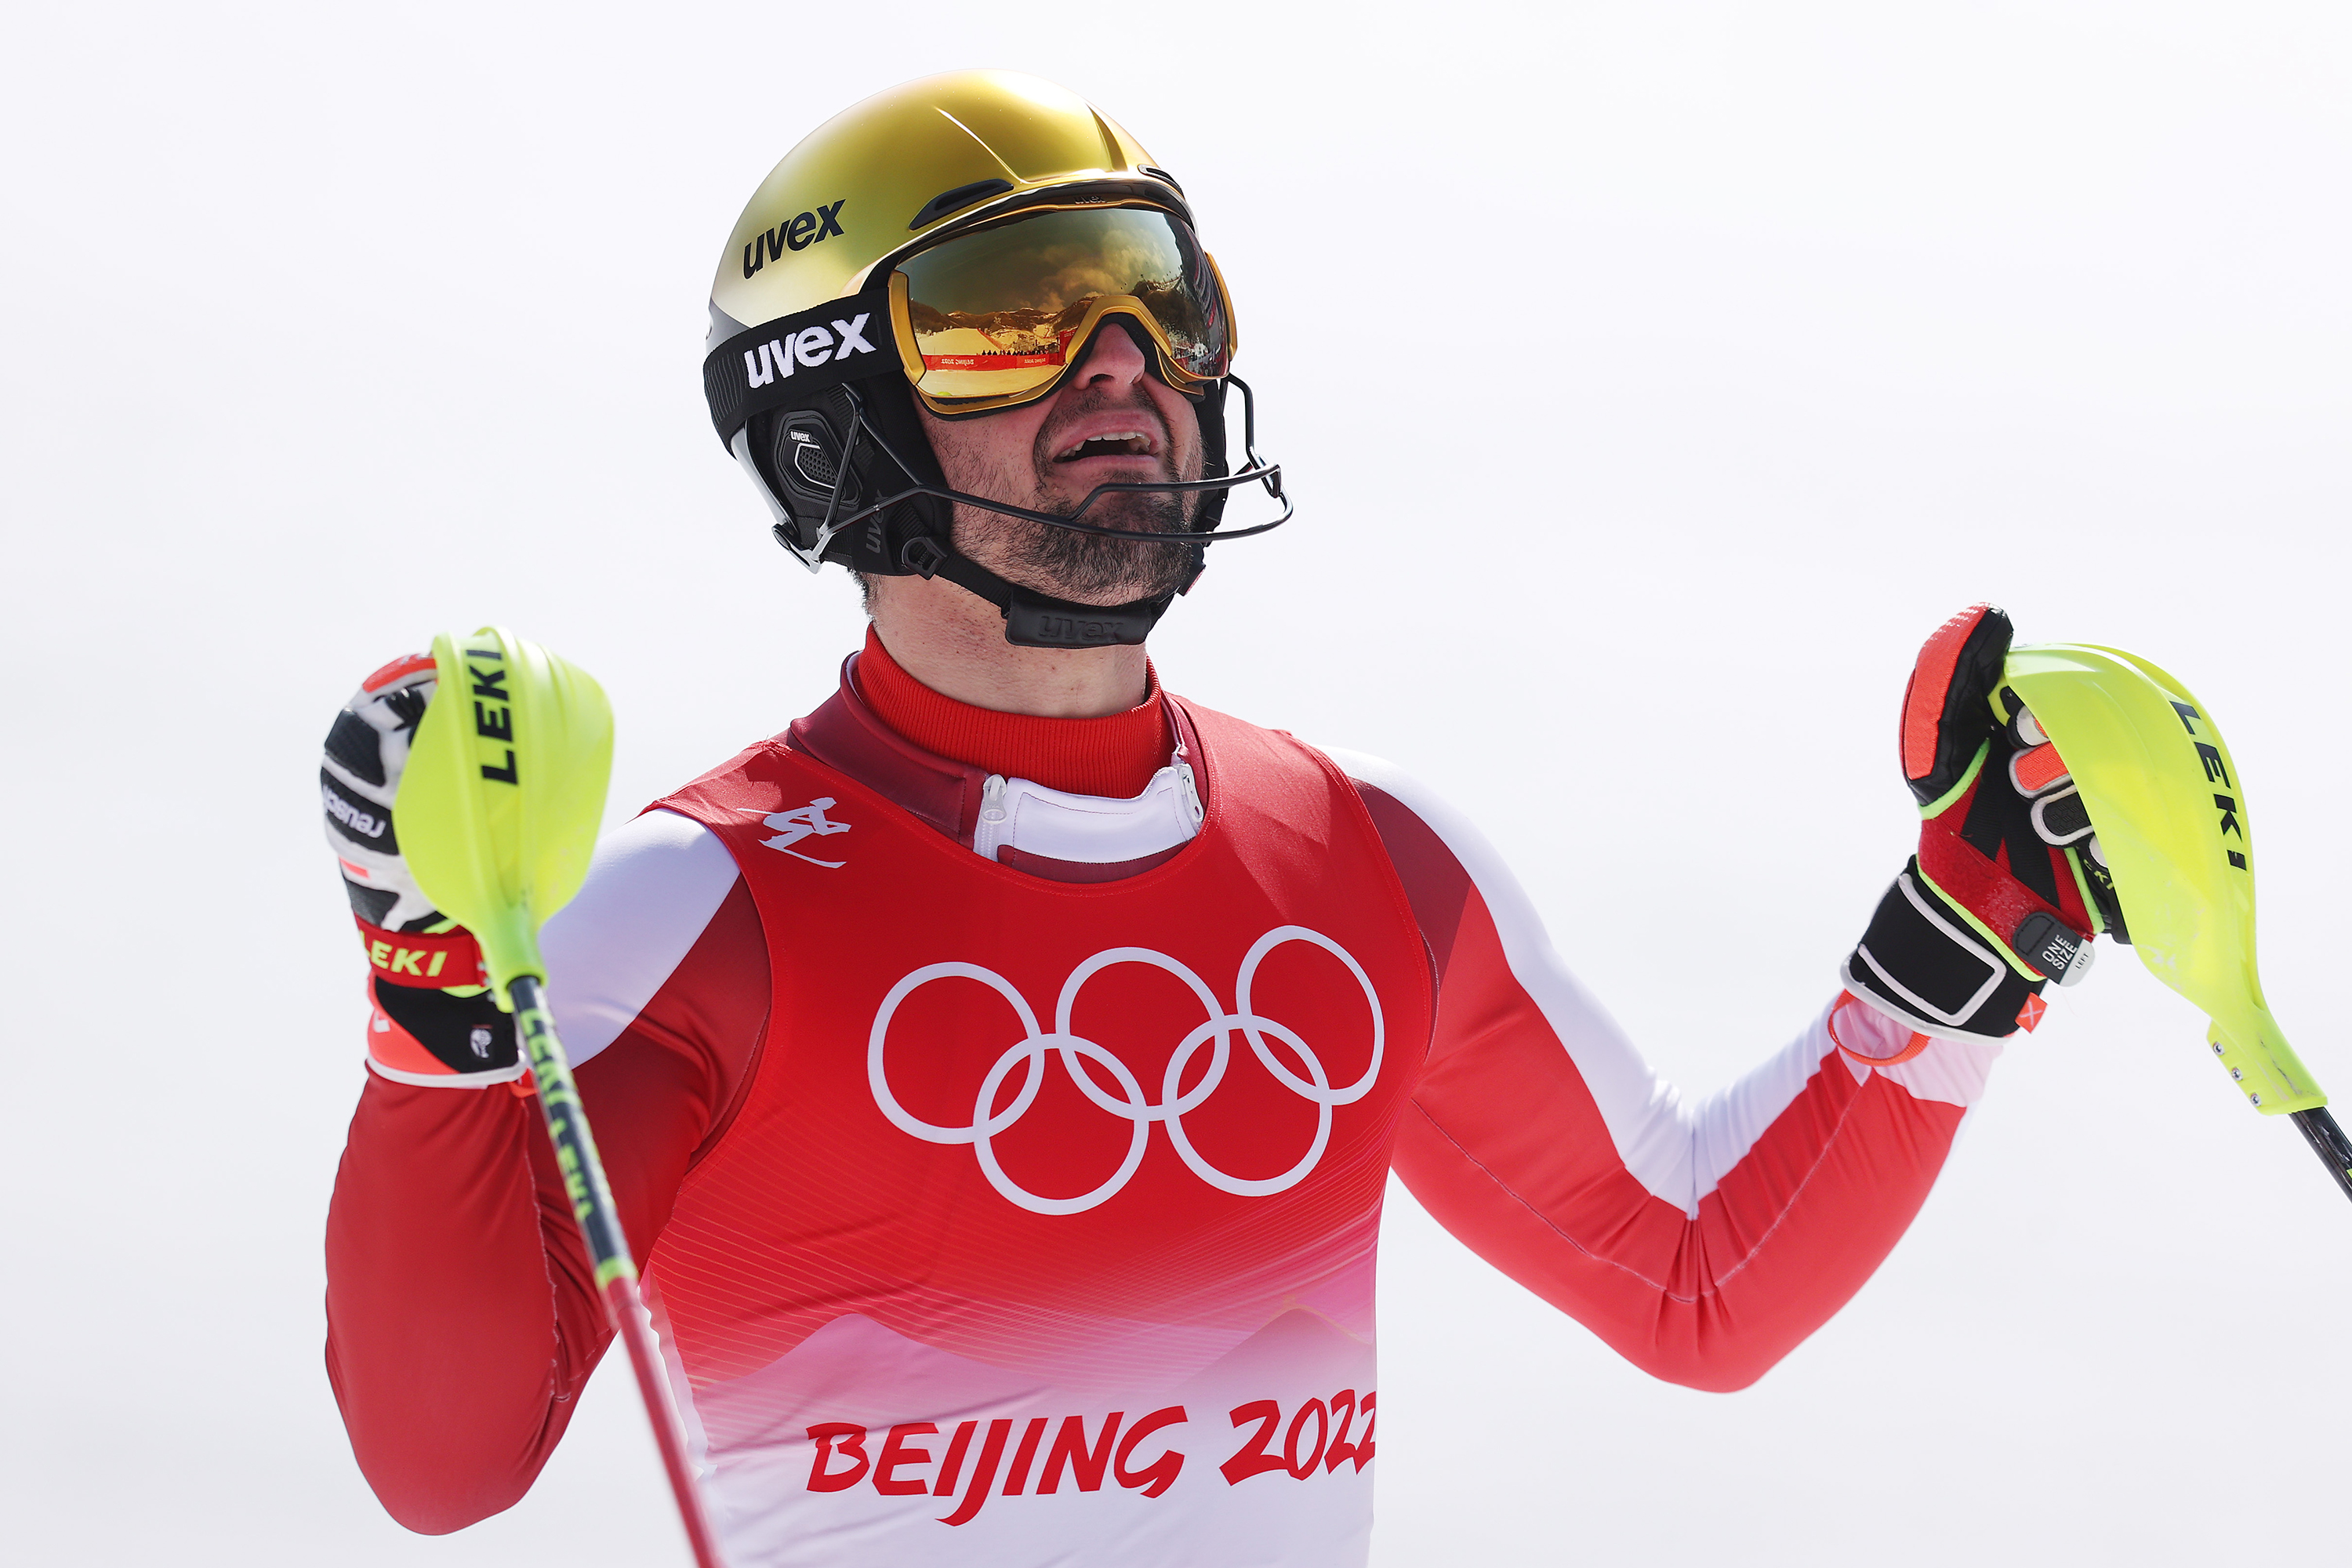 Austria’s Johannes Strolz reacts following his run during the men's alpine combined slalom on Thursday.